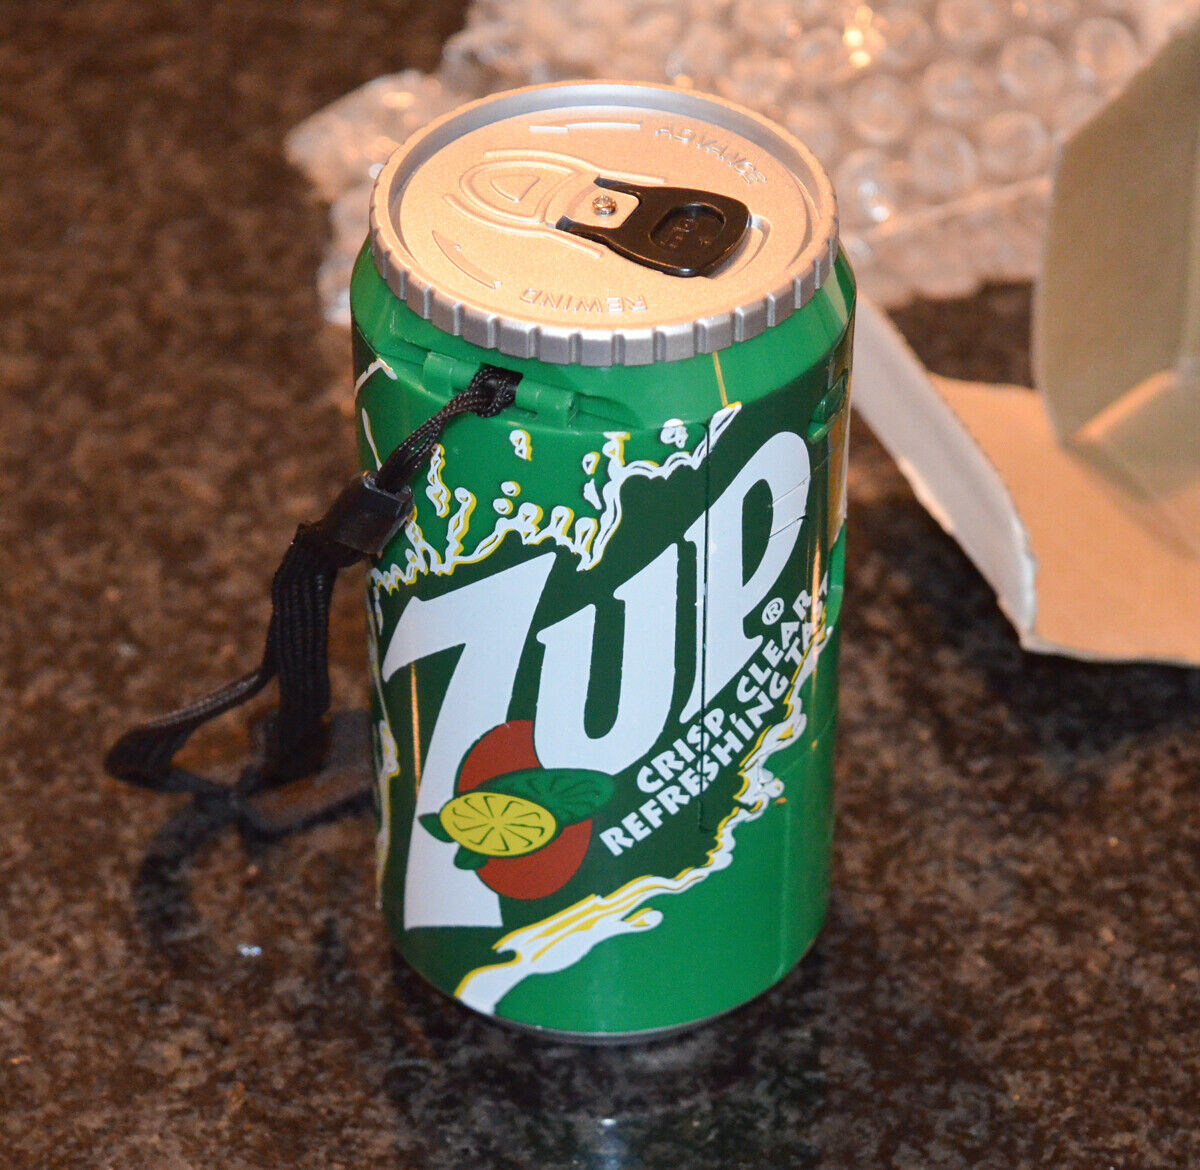 1990's 7Up 35mm soda can promotional camera - NEVER USED